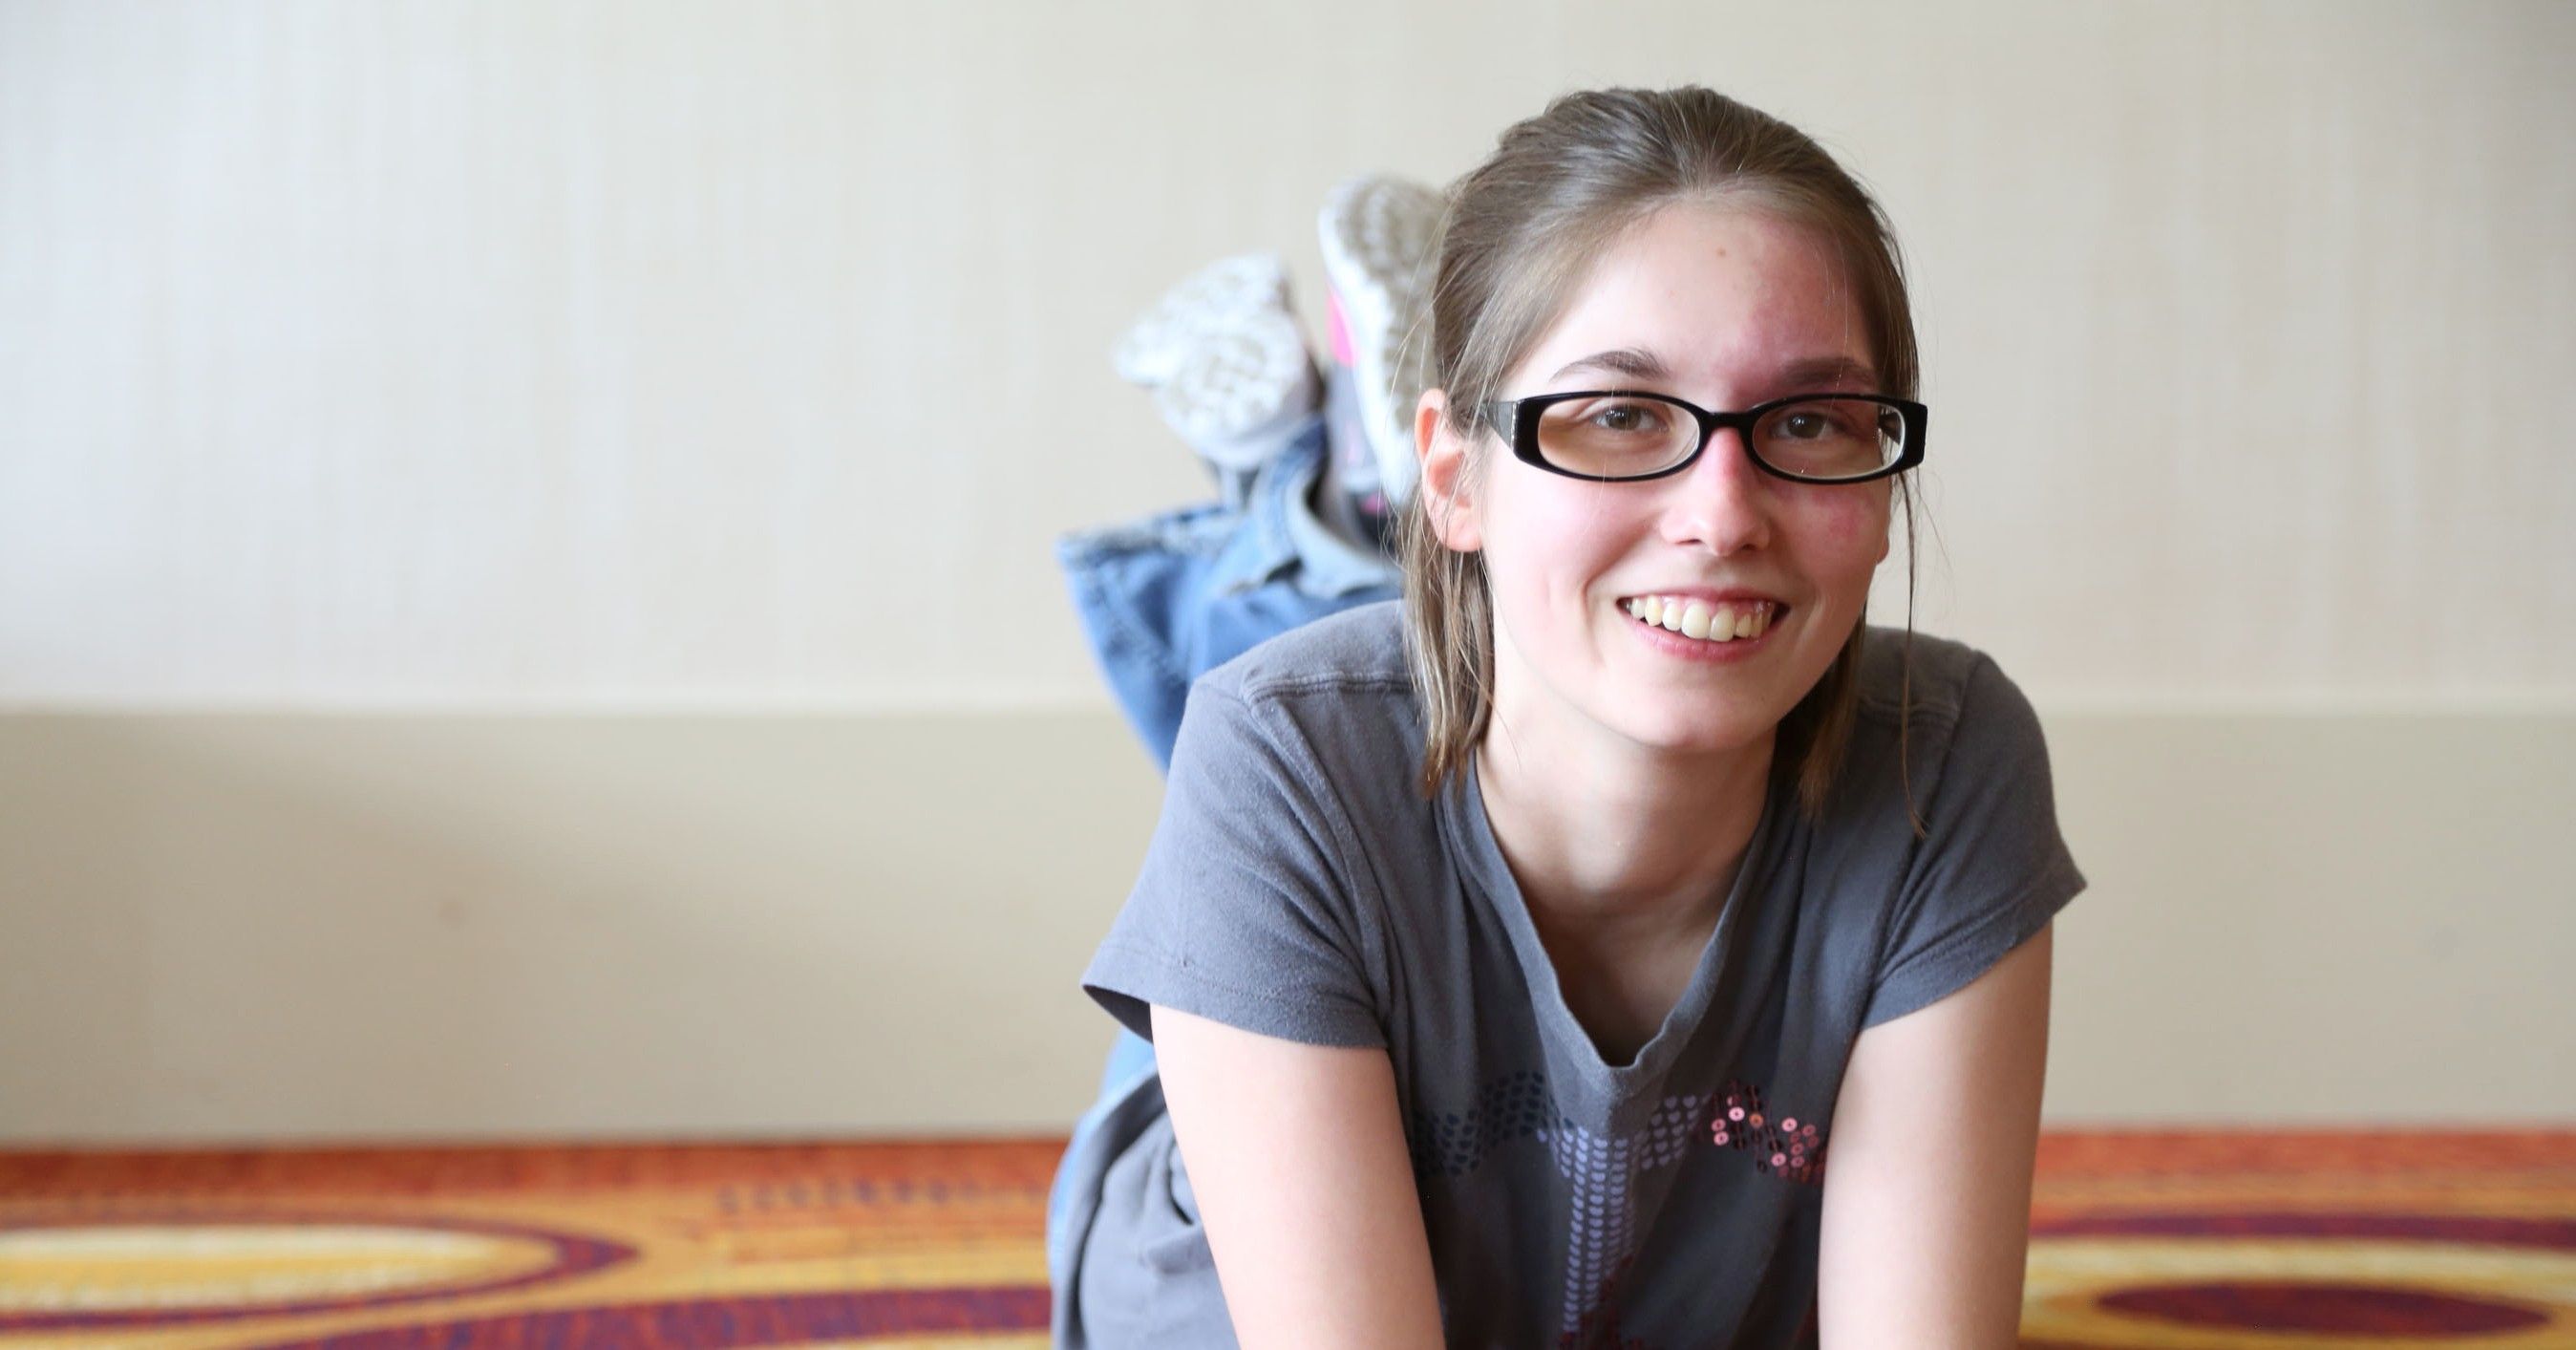 Teenage girl laying on her stomach, smiling at the camera. She is wearing glasses and has a birthmark on her face.